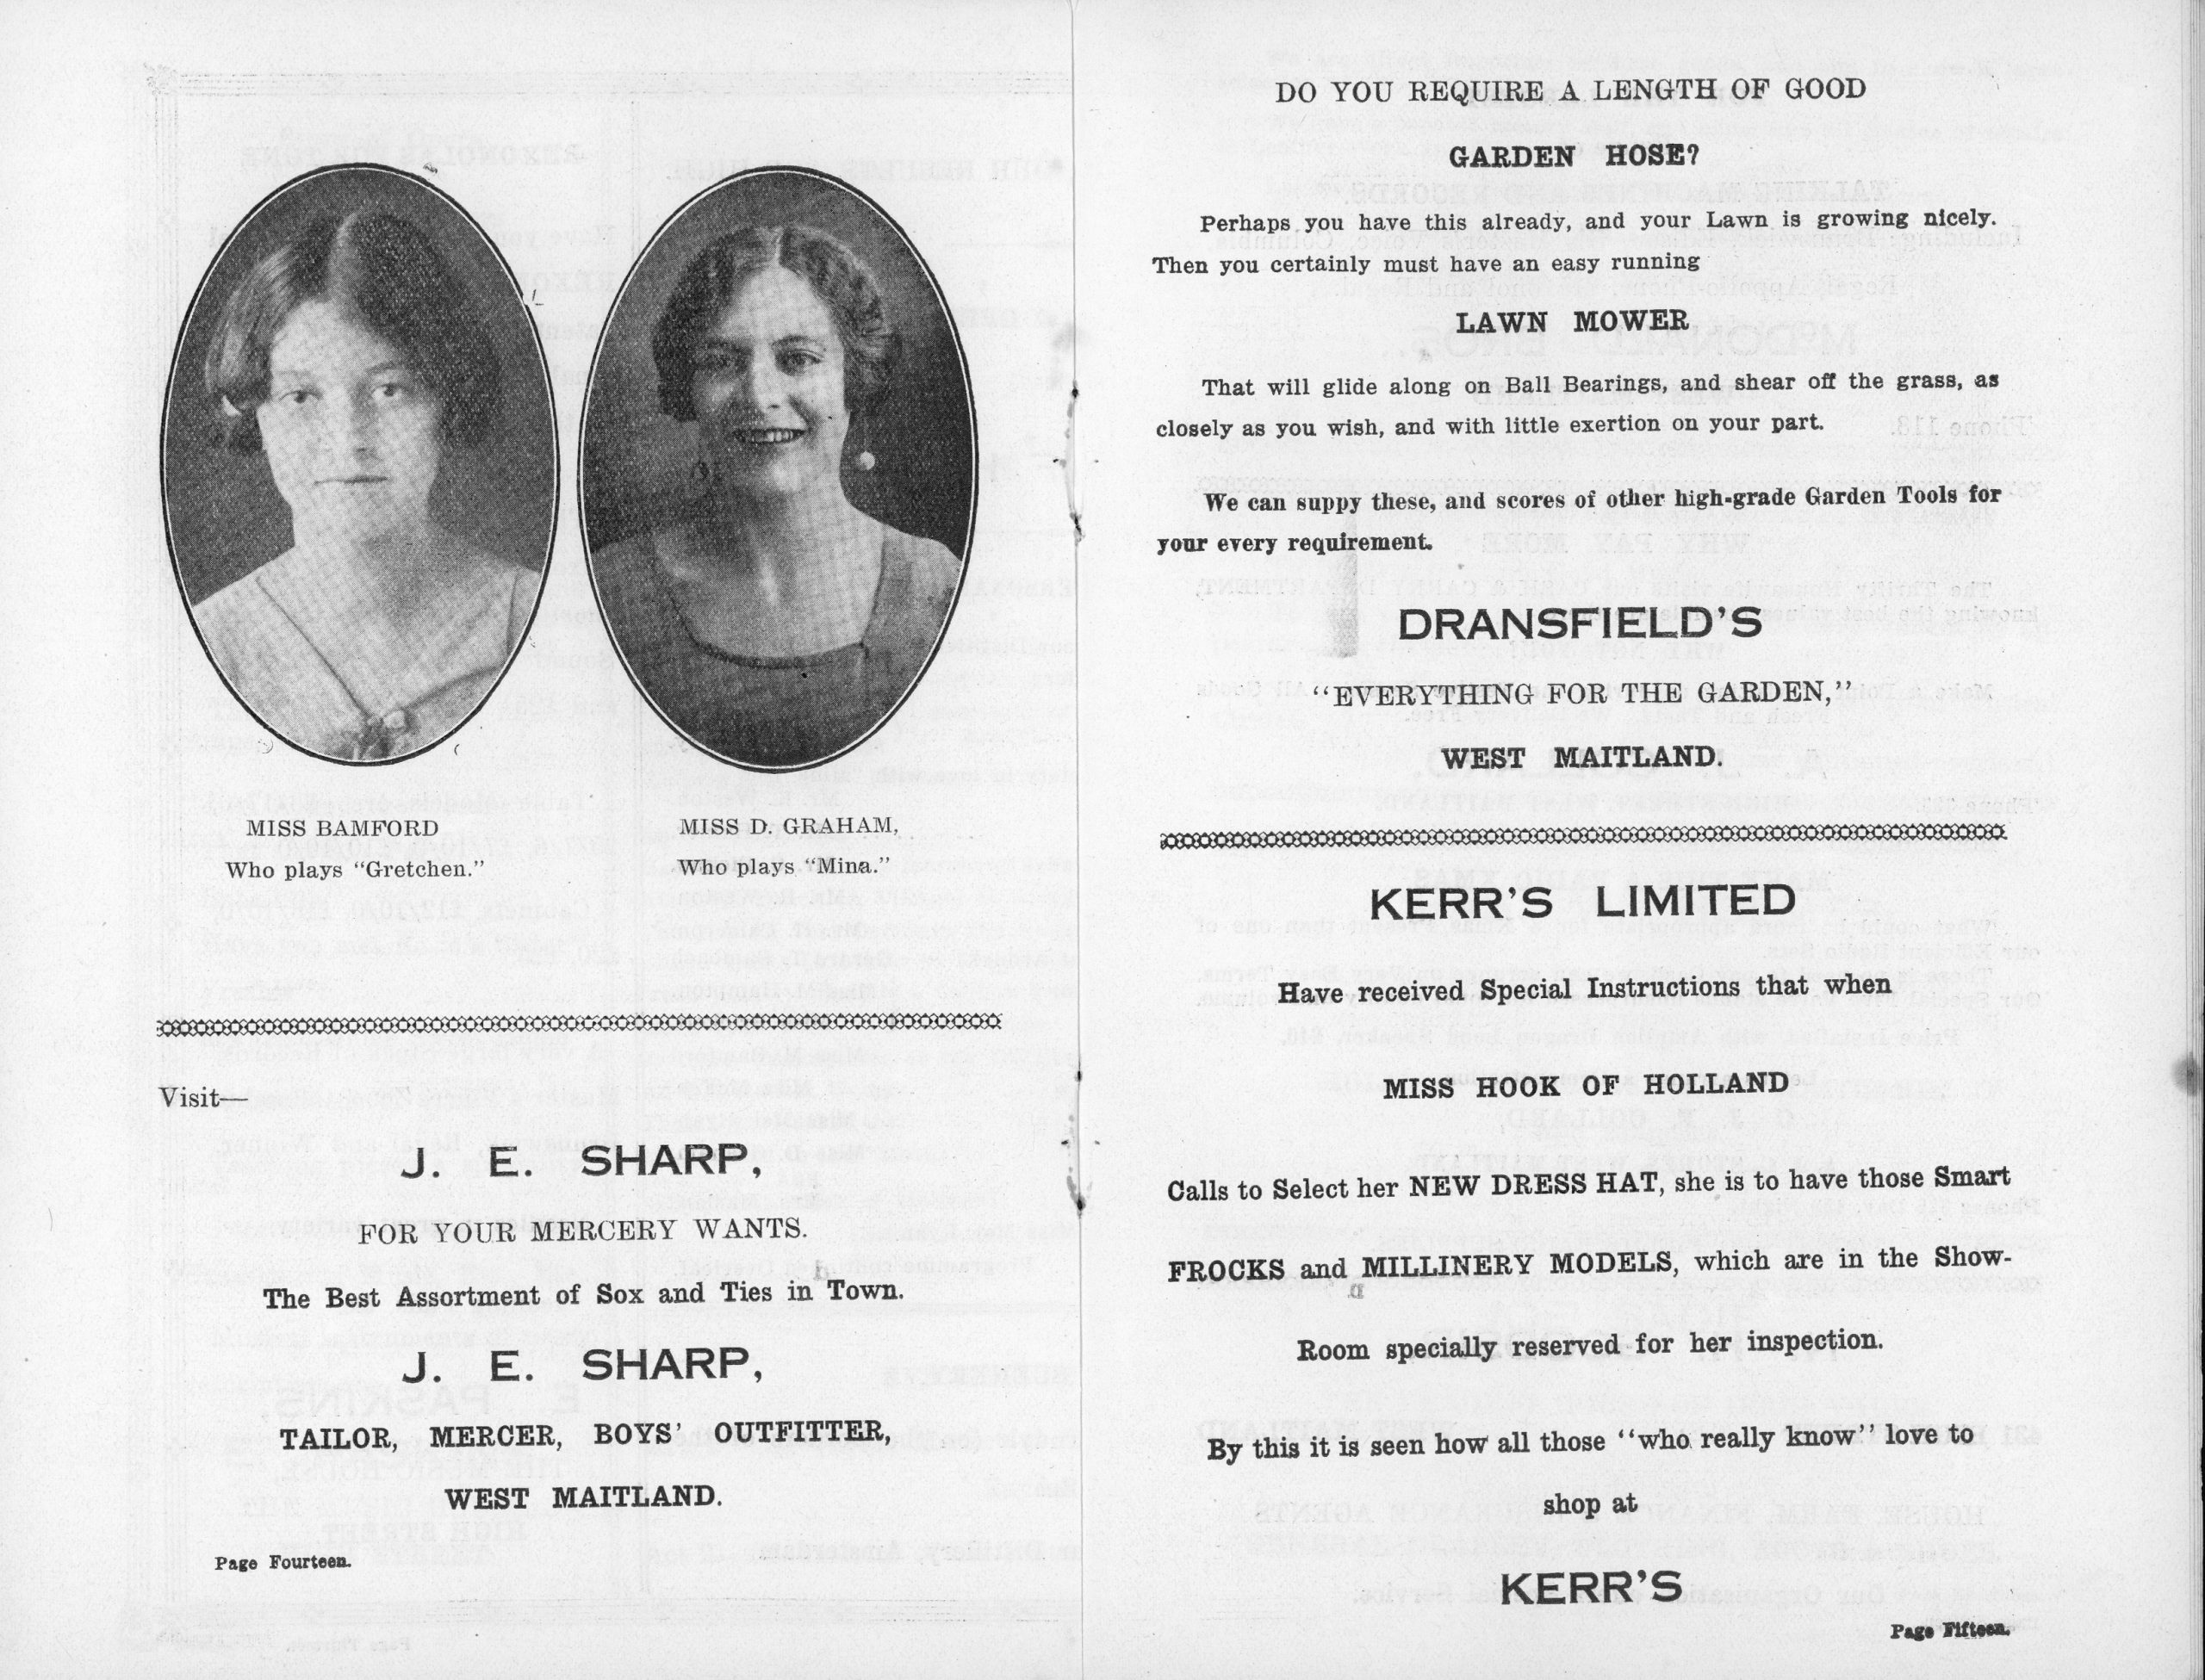 Text advertisements for tailoring, garden equipment, and millinery sit beside photographs of Miss Bamford (who plays 'Gretchen') and Miss D. Graham (who plays 'Mina').